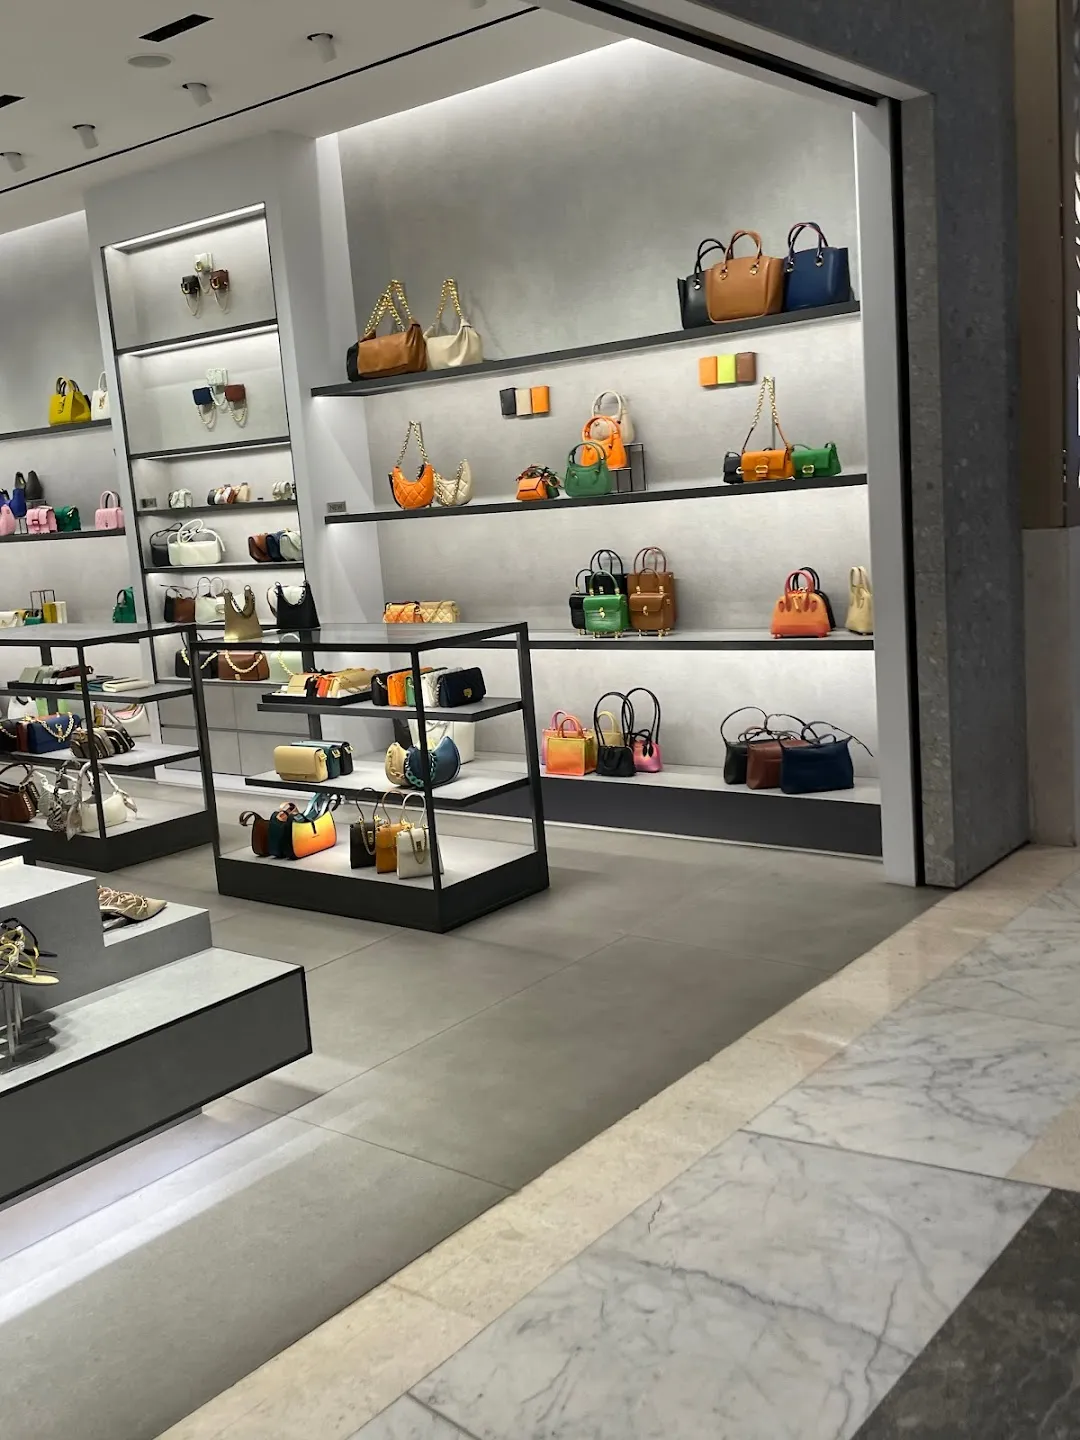 Quest Mall - Do you know where Charles & Keith originated? #ContestAlert  #QuestGiveAway